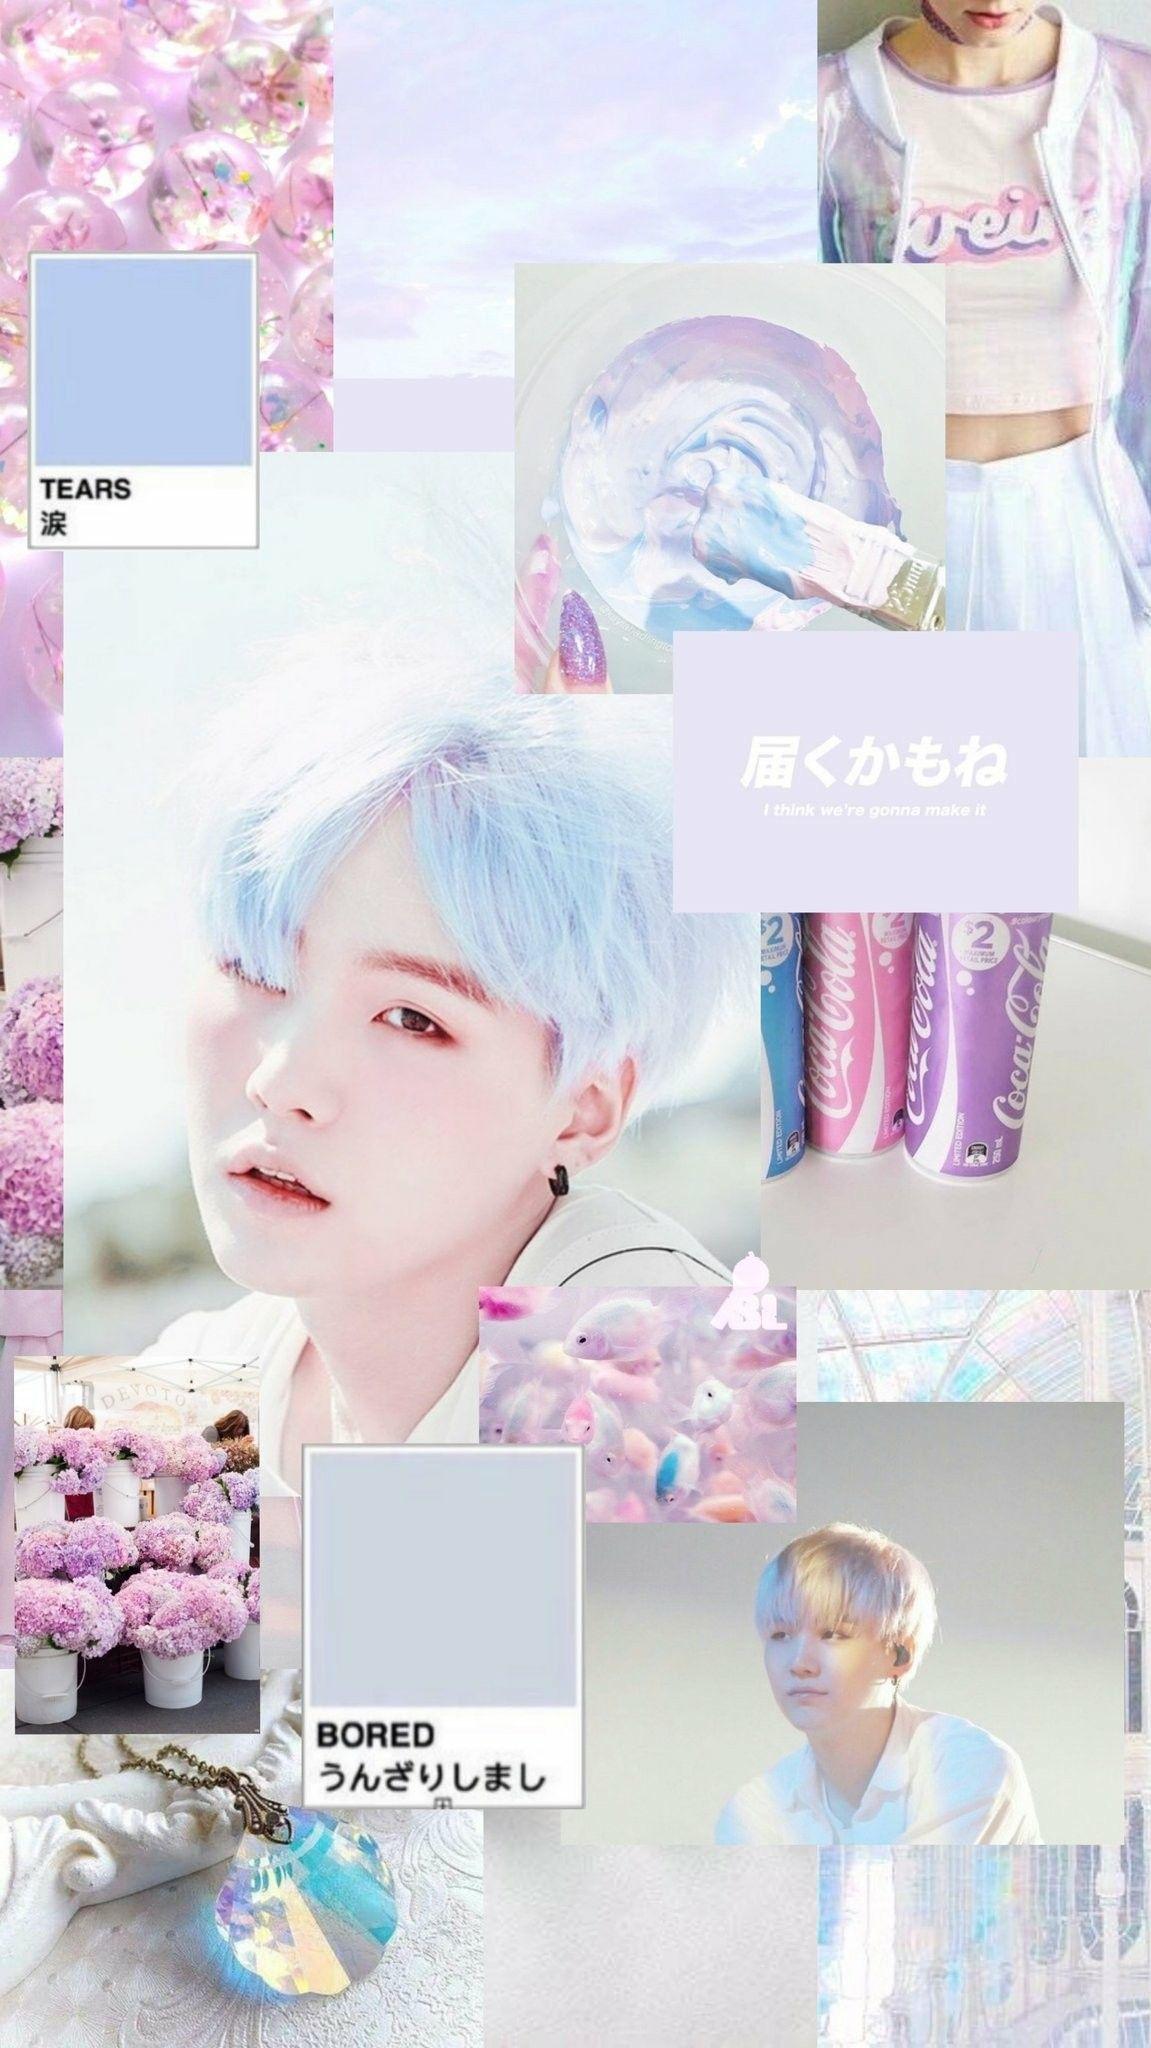 Best Bts Aesthetic Wallpaper Pink - BOYBAND AND GIRLBAND